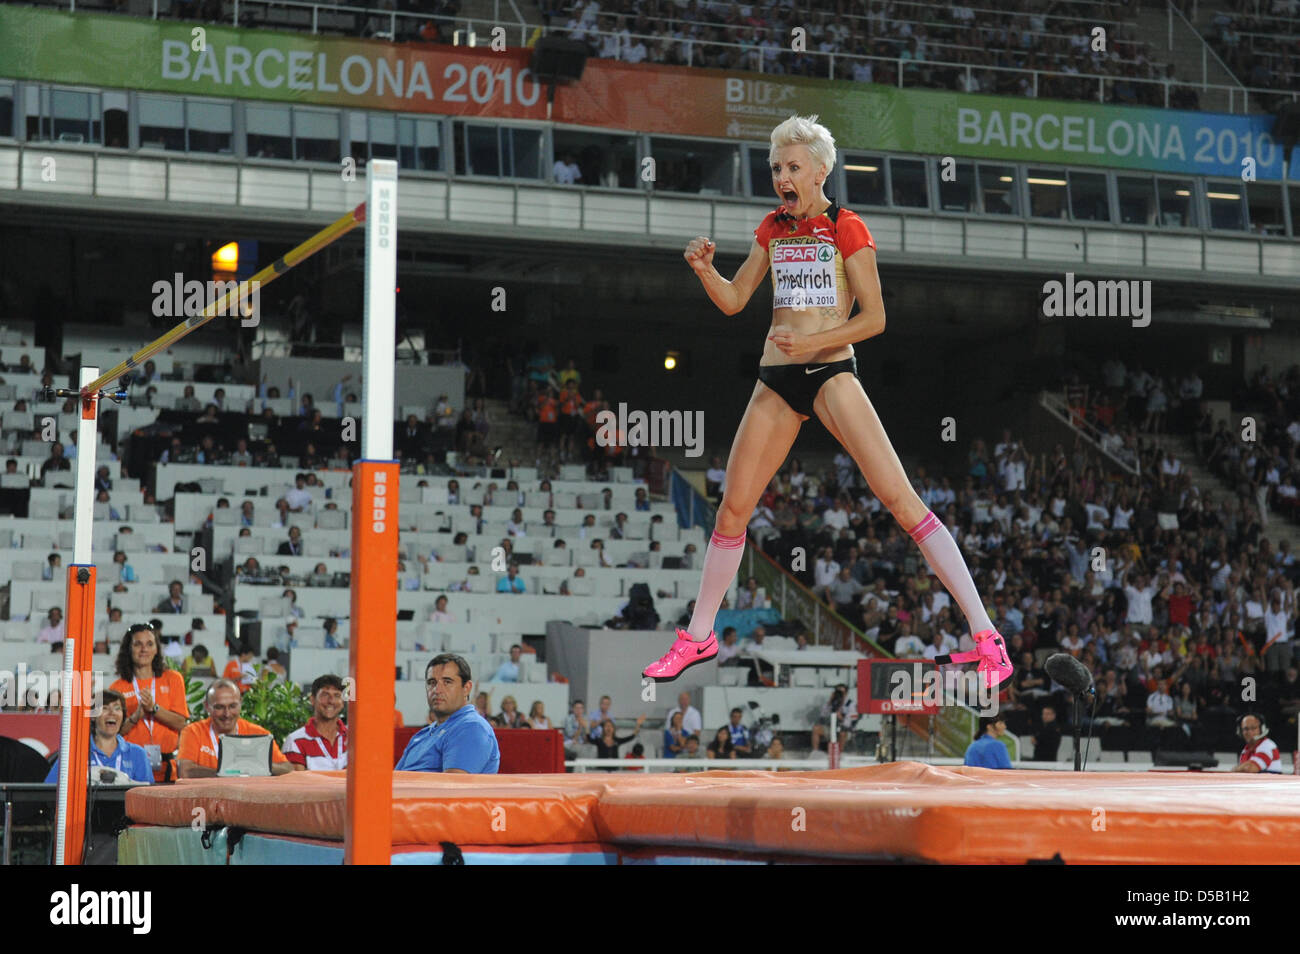 German high jumper Ariane Friedrich leaps up in joy after winning the bronze medal in the women's high jump competition at the European Athletics Championships in Barcelona, Spain, 01 August 2010. Photo: Rainer Jensen Stock Photo